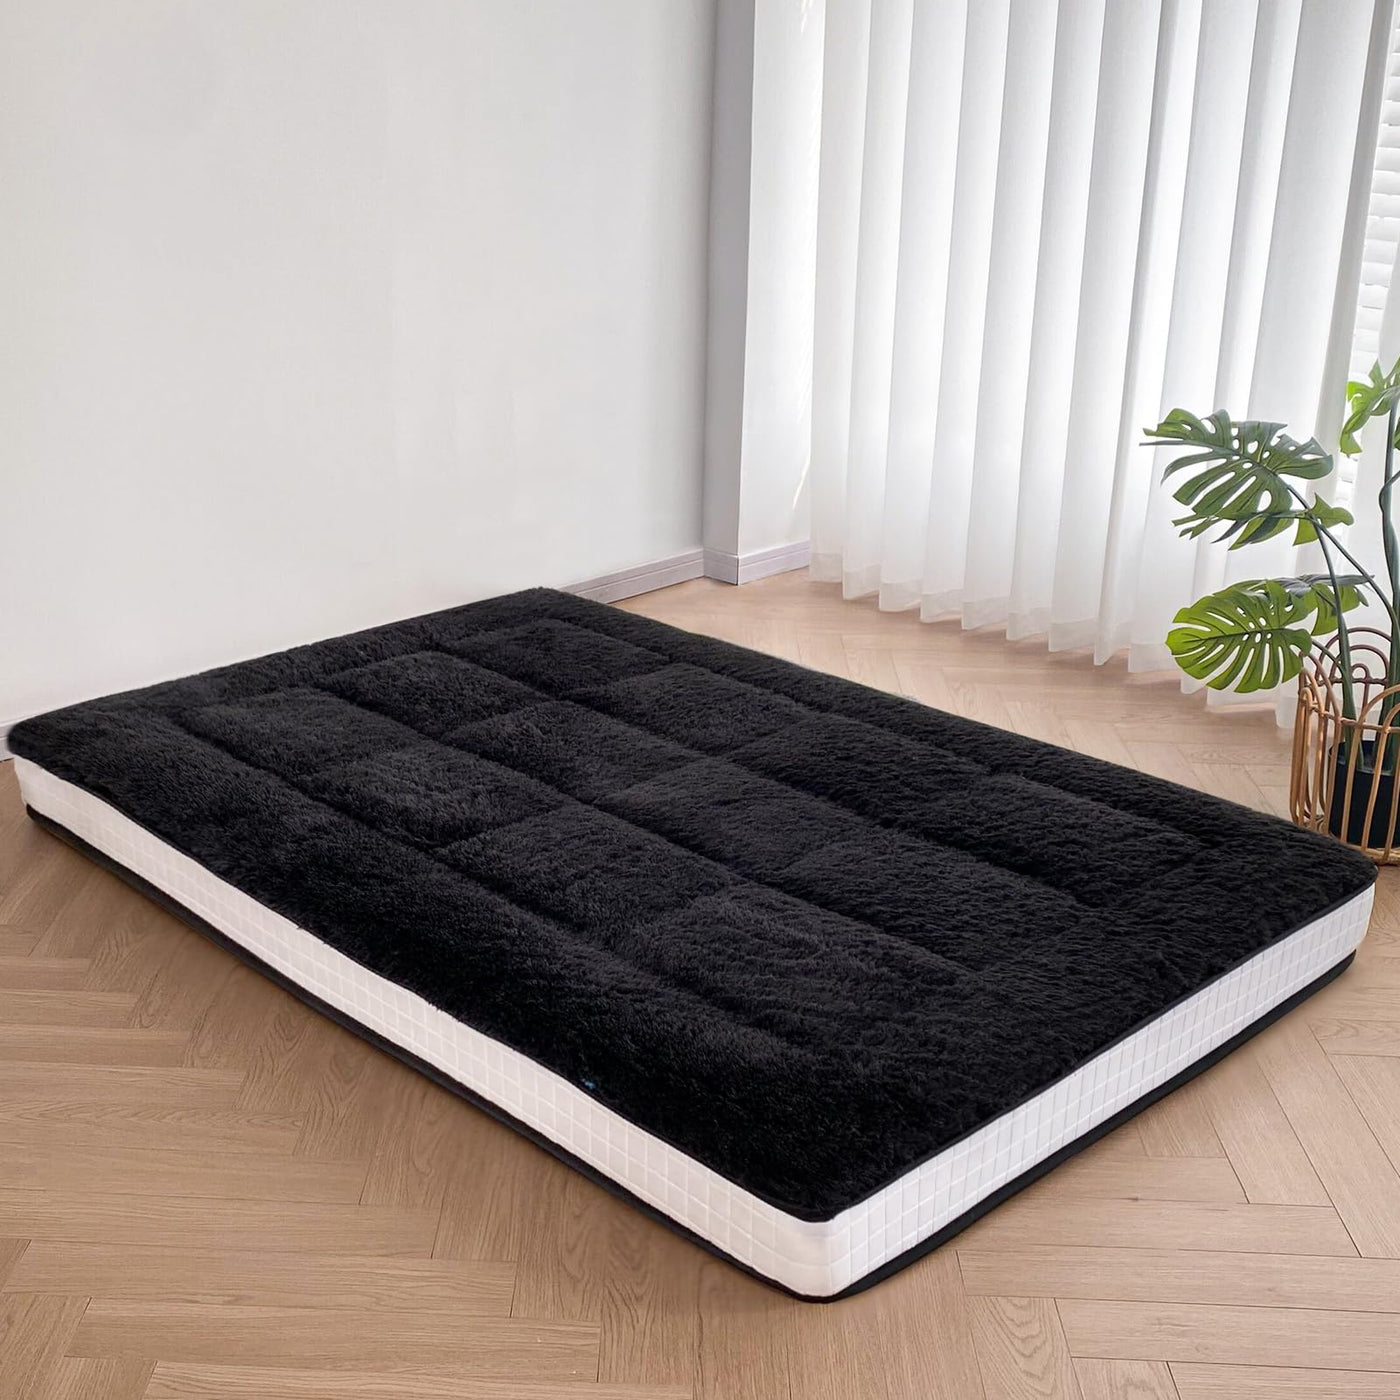 MAXYOYO 6" Extra Thick Fluffy Floor Futon Mattress, Long Plush Square Quilted Floor Mattress for Adults, Black